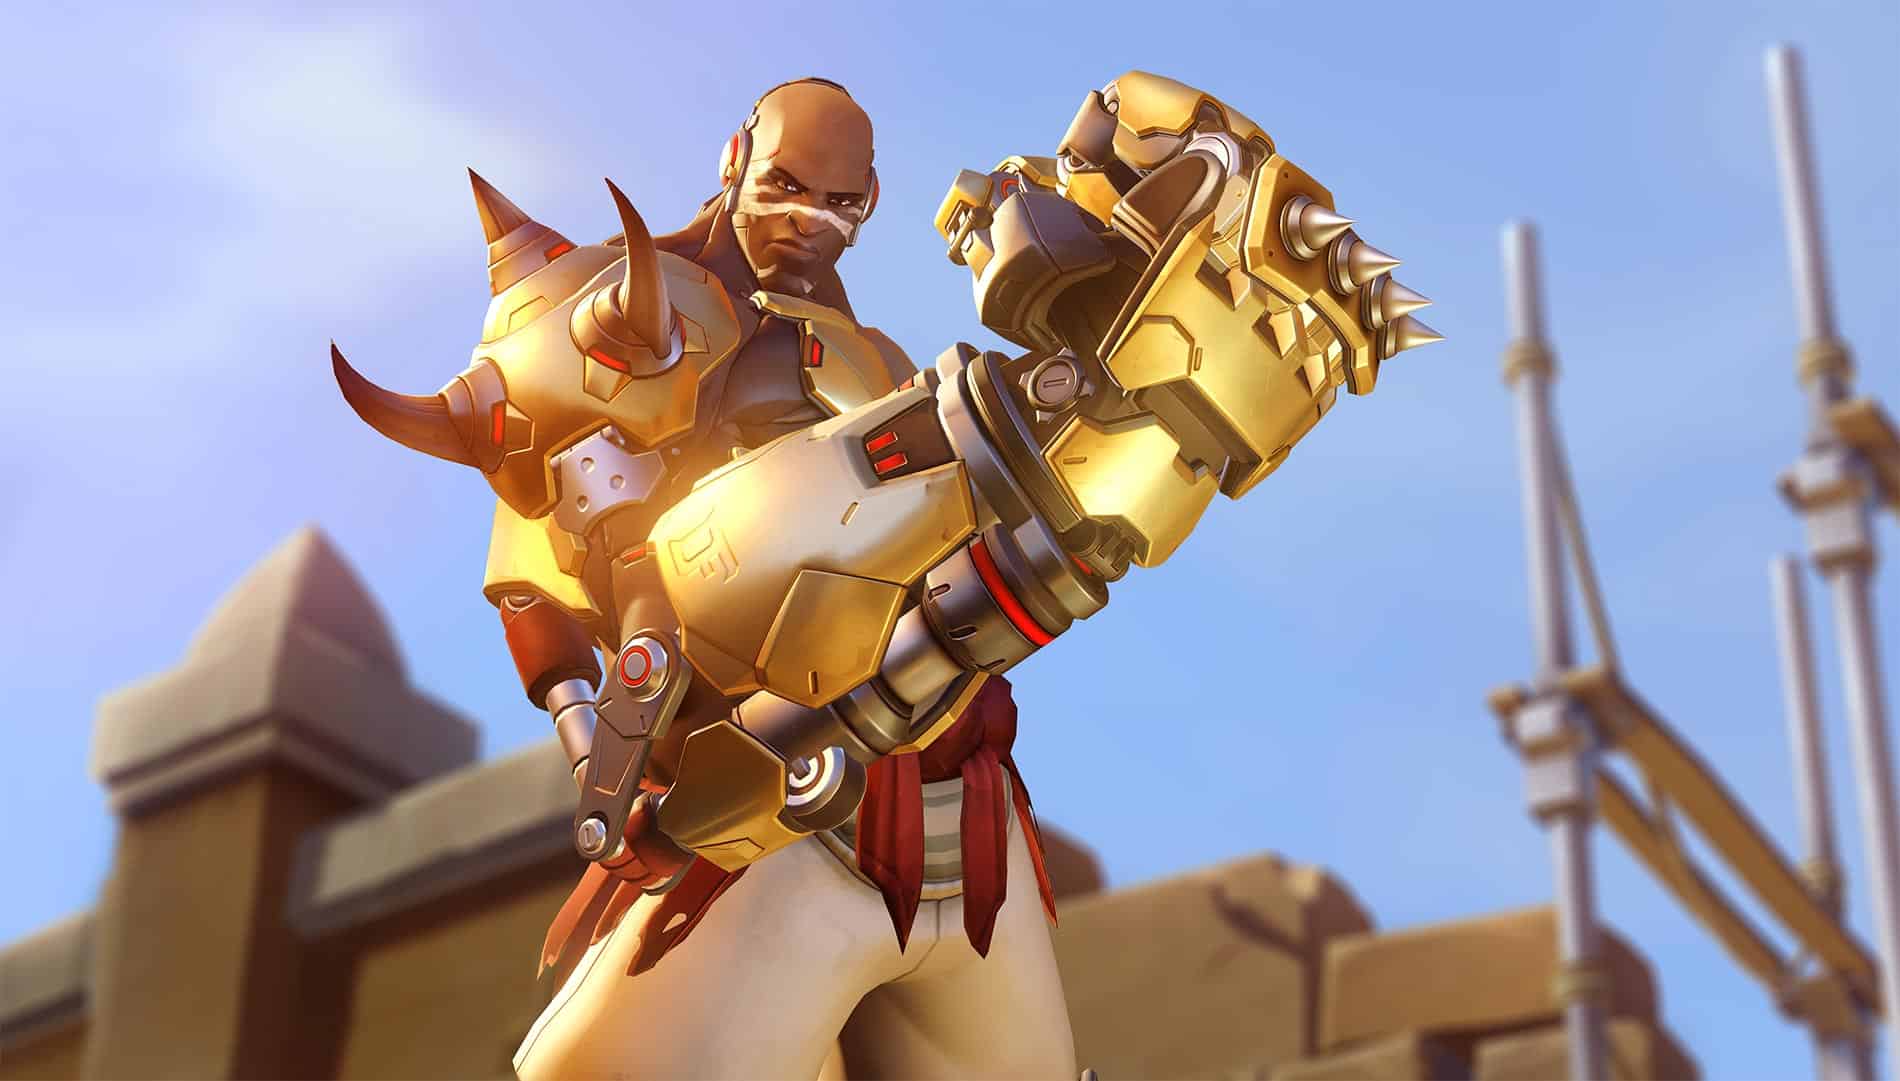 Overwatch 2 Double XP Weekend kicks off tomorrow, free
highlight intros up for grabs